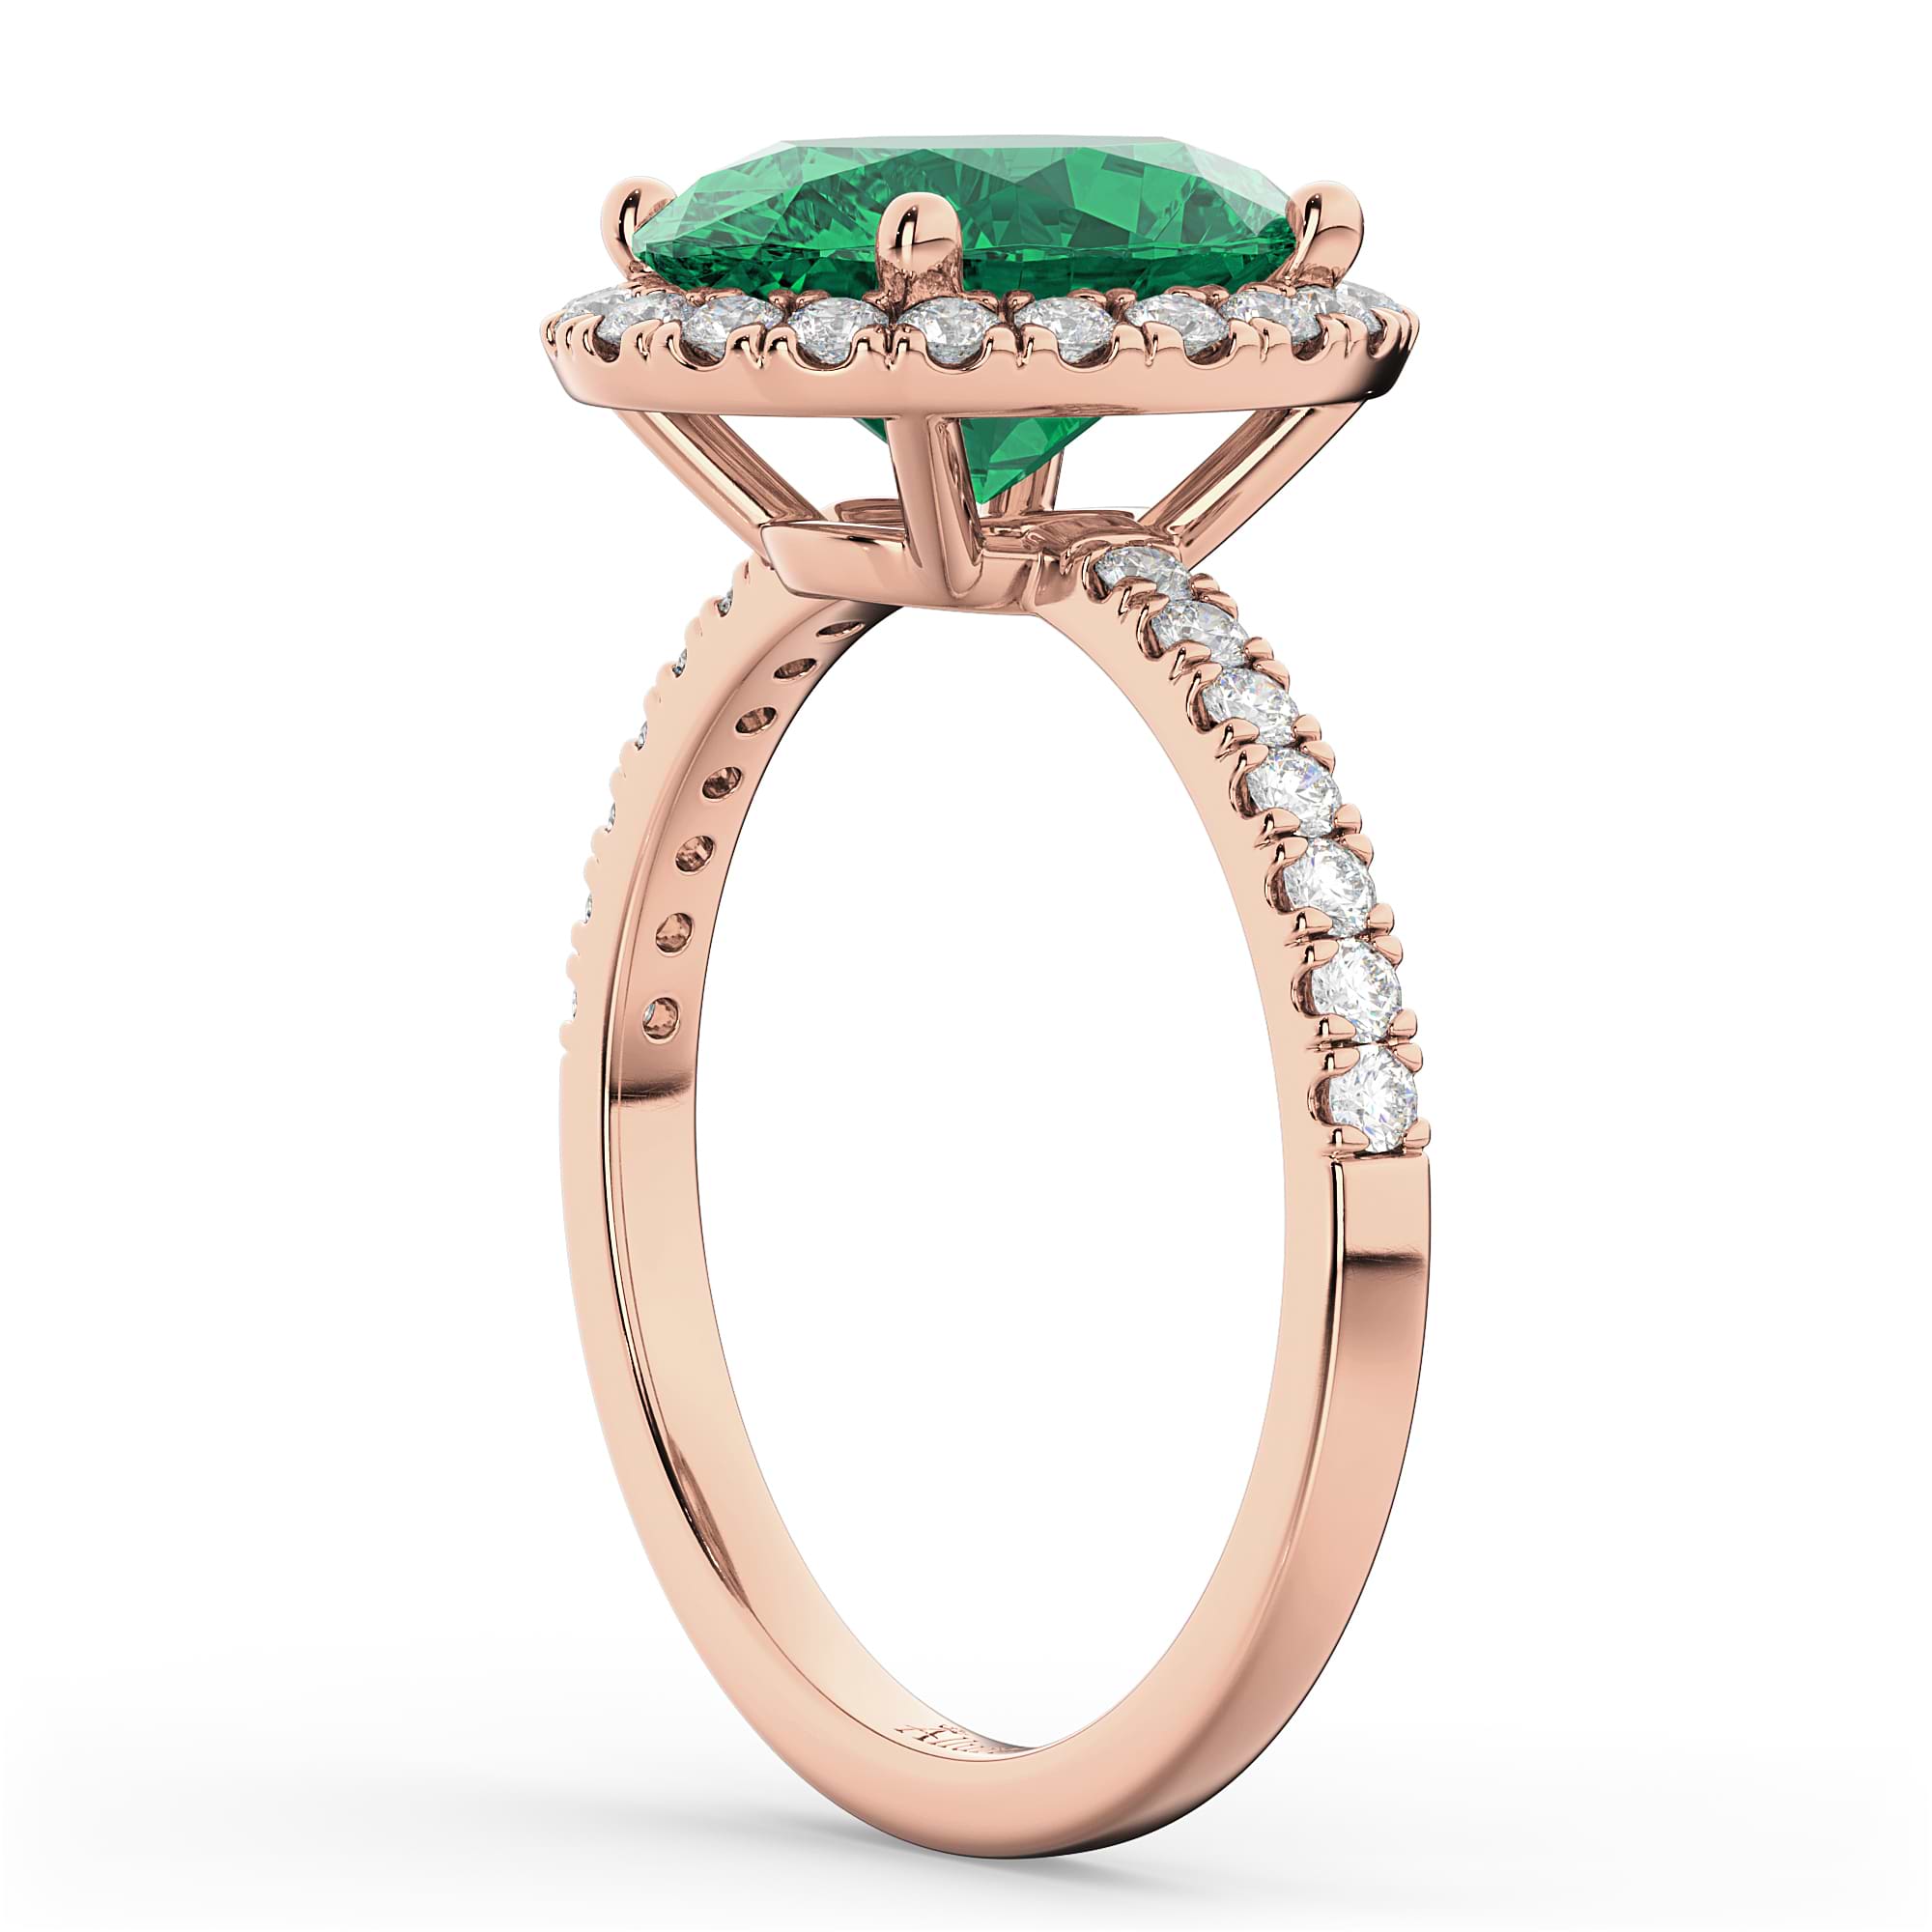 Oval Cut Halo Emerald & Diamond Engagement Ring 14K Rose Gold 3.11ct